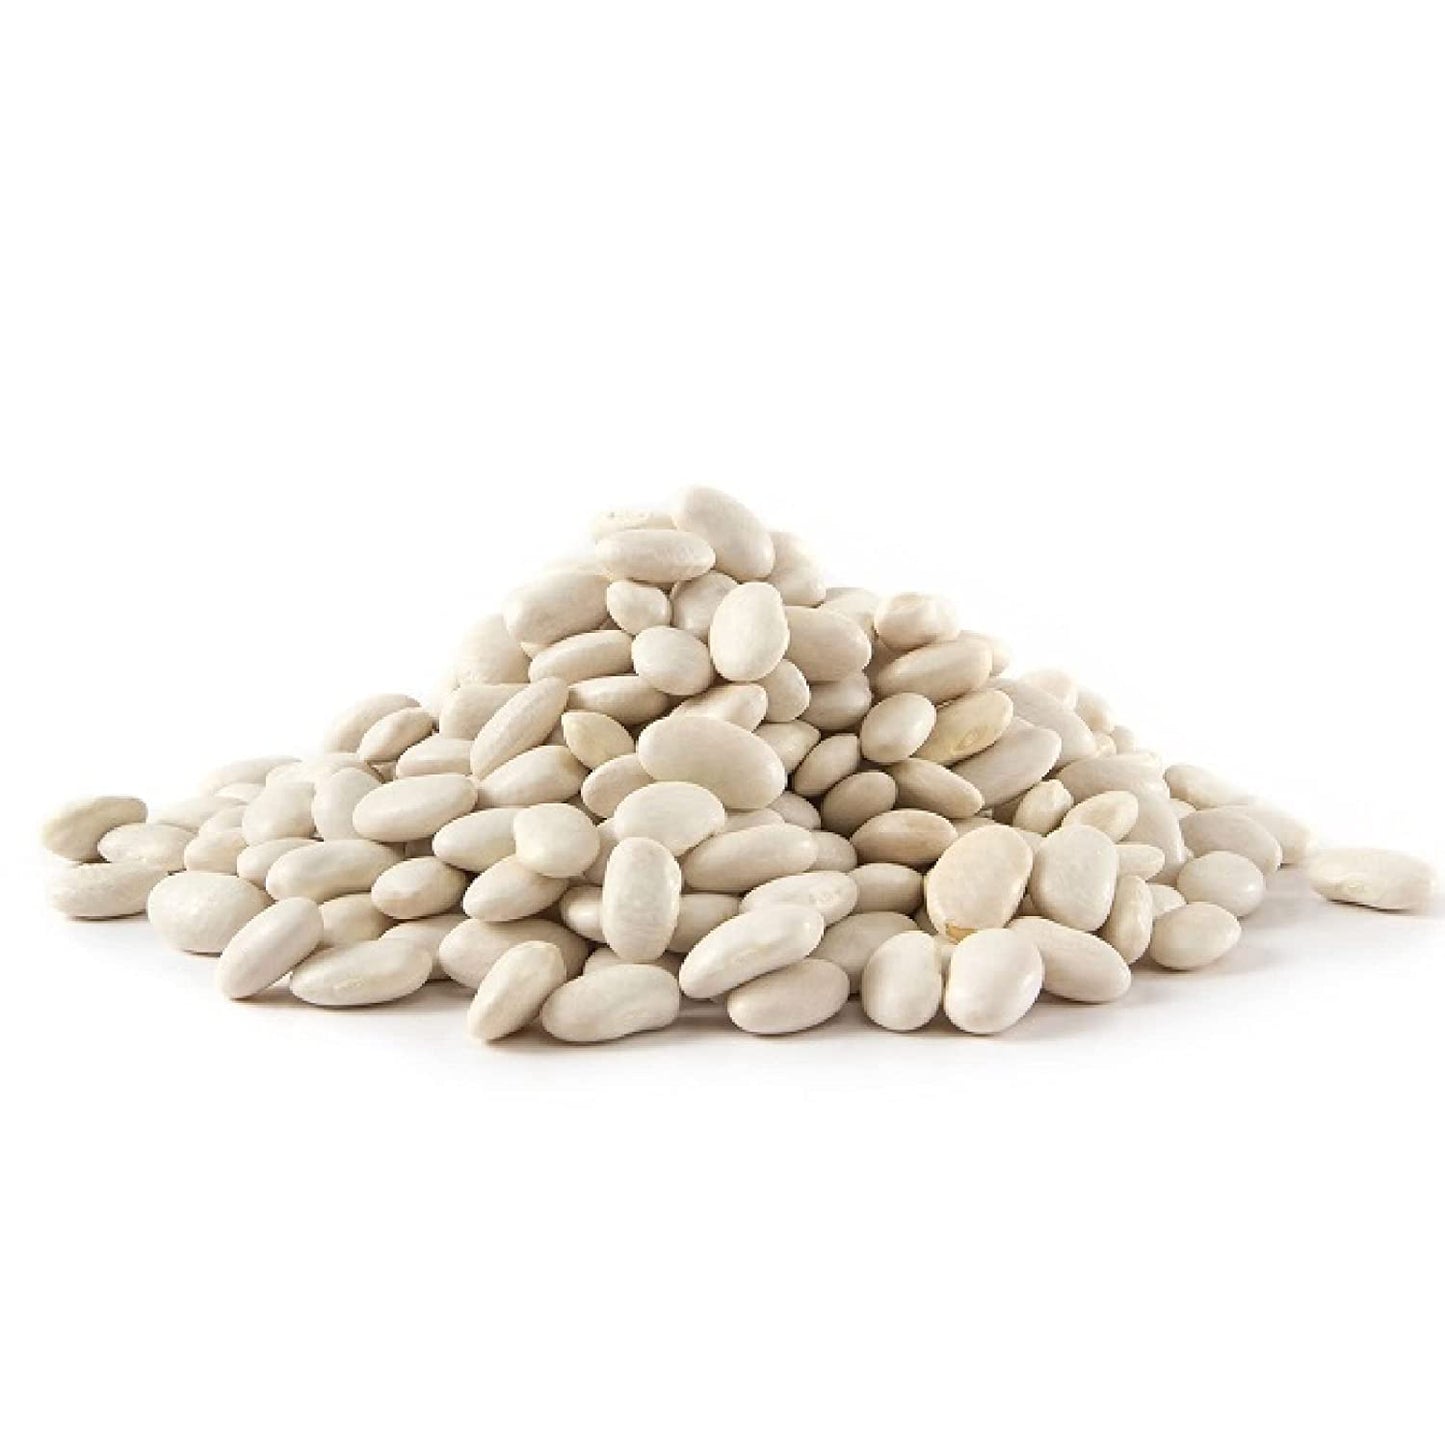 Wheatland™ White Beans "Navy Beans" • 20lb • Farm Fresh • 25 Year Shelf Life • Lab-tested ISO 17025 Verified Chemical-Free • Never Irradiated, no desiccants and non GMO • High Trust Seller • 40 Year Legacy of Prepping